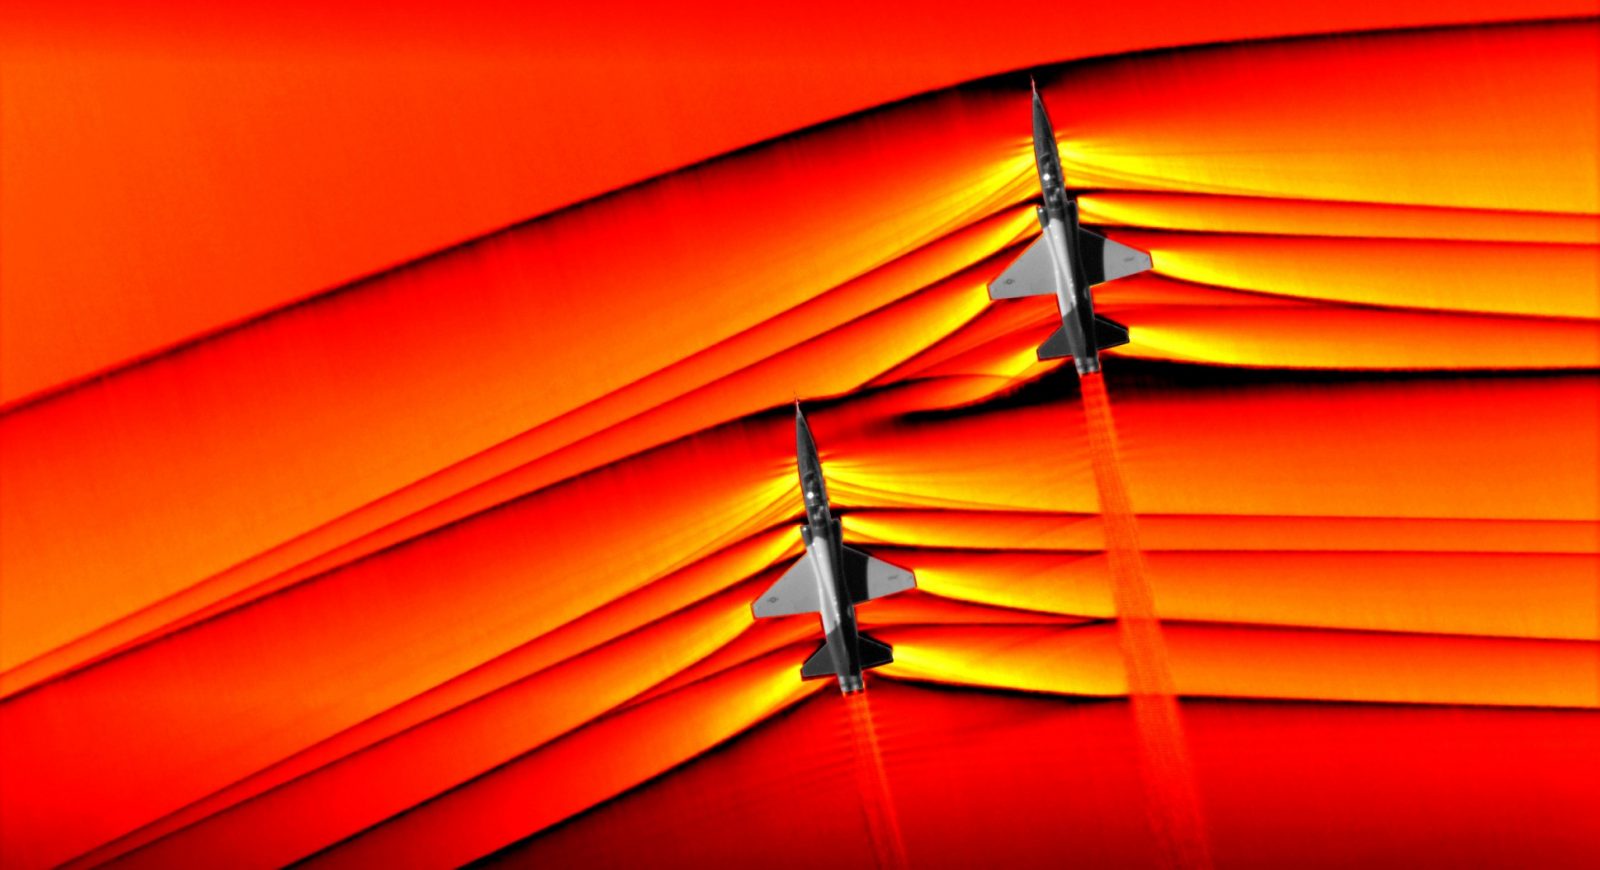 NASA captures first-ever air-to-air images of supersonic jets' shockwaves interacting in mid-flight